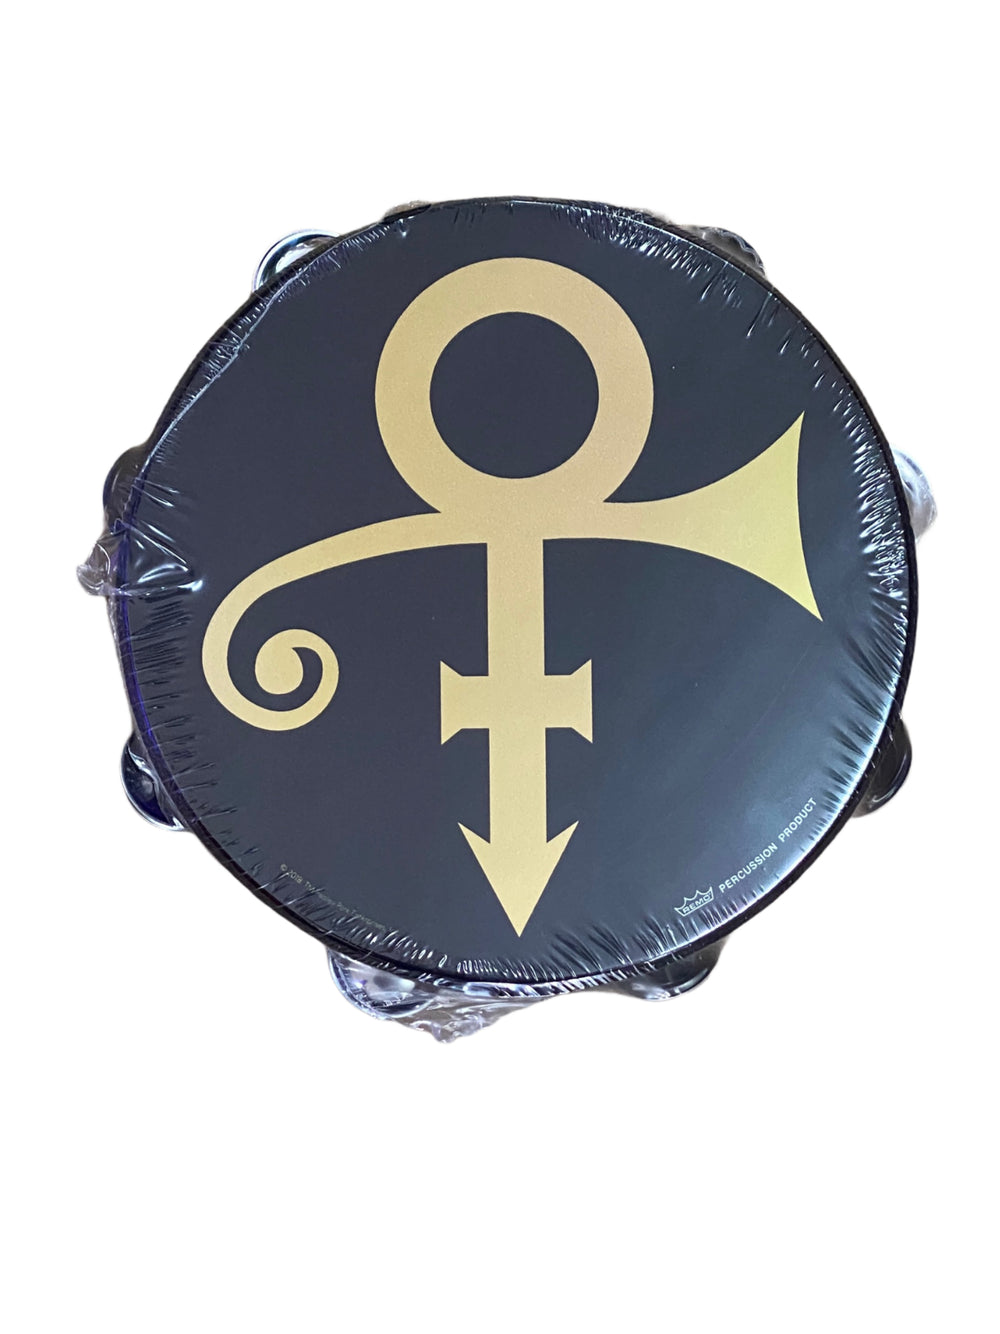 Prince Official Paisley Park Black Gold LOVE SYMBOL Tambourine Brand New Sealed